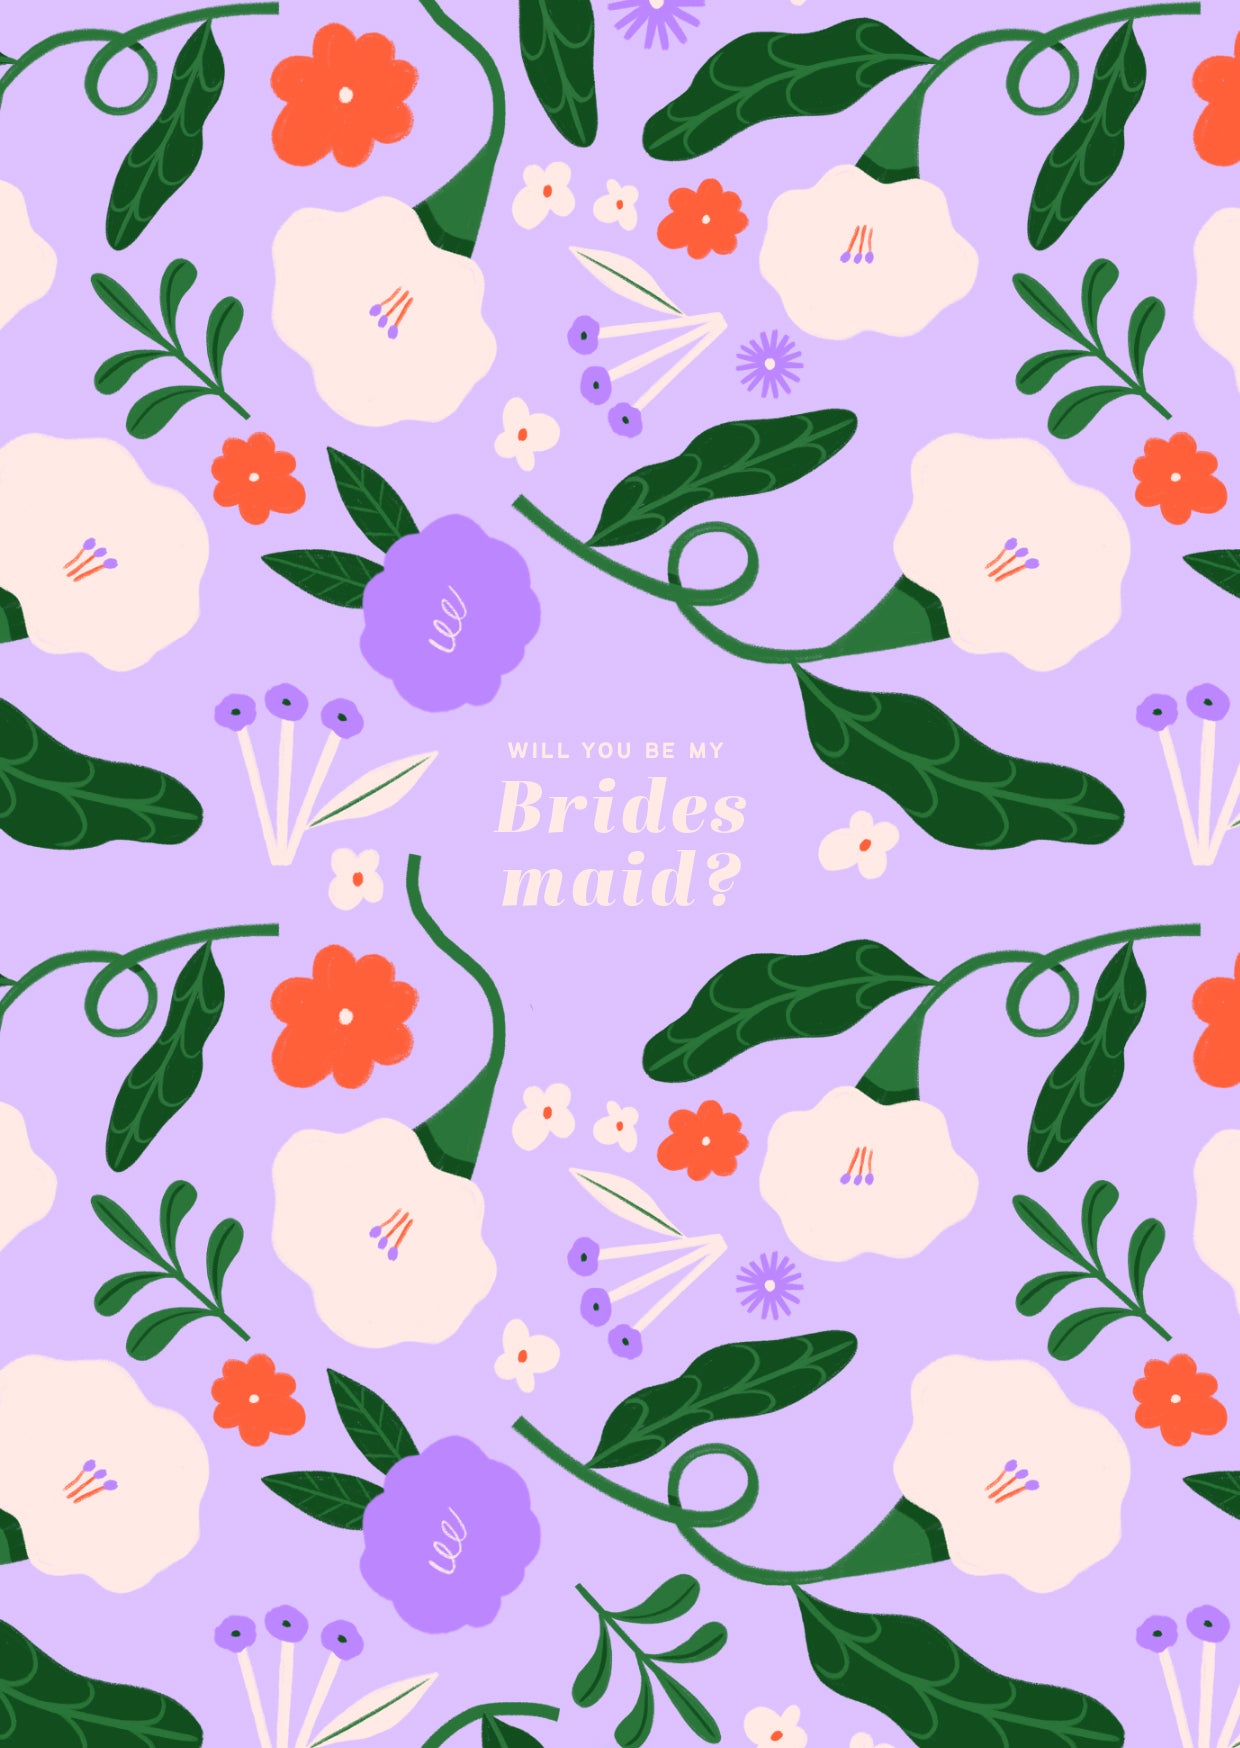 Will you be my Bridesmaid? - Floral